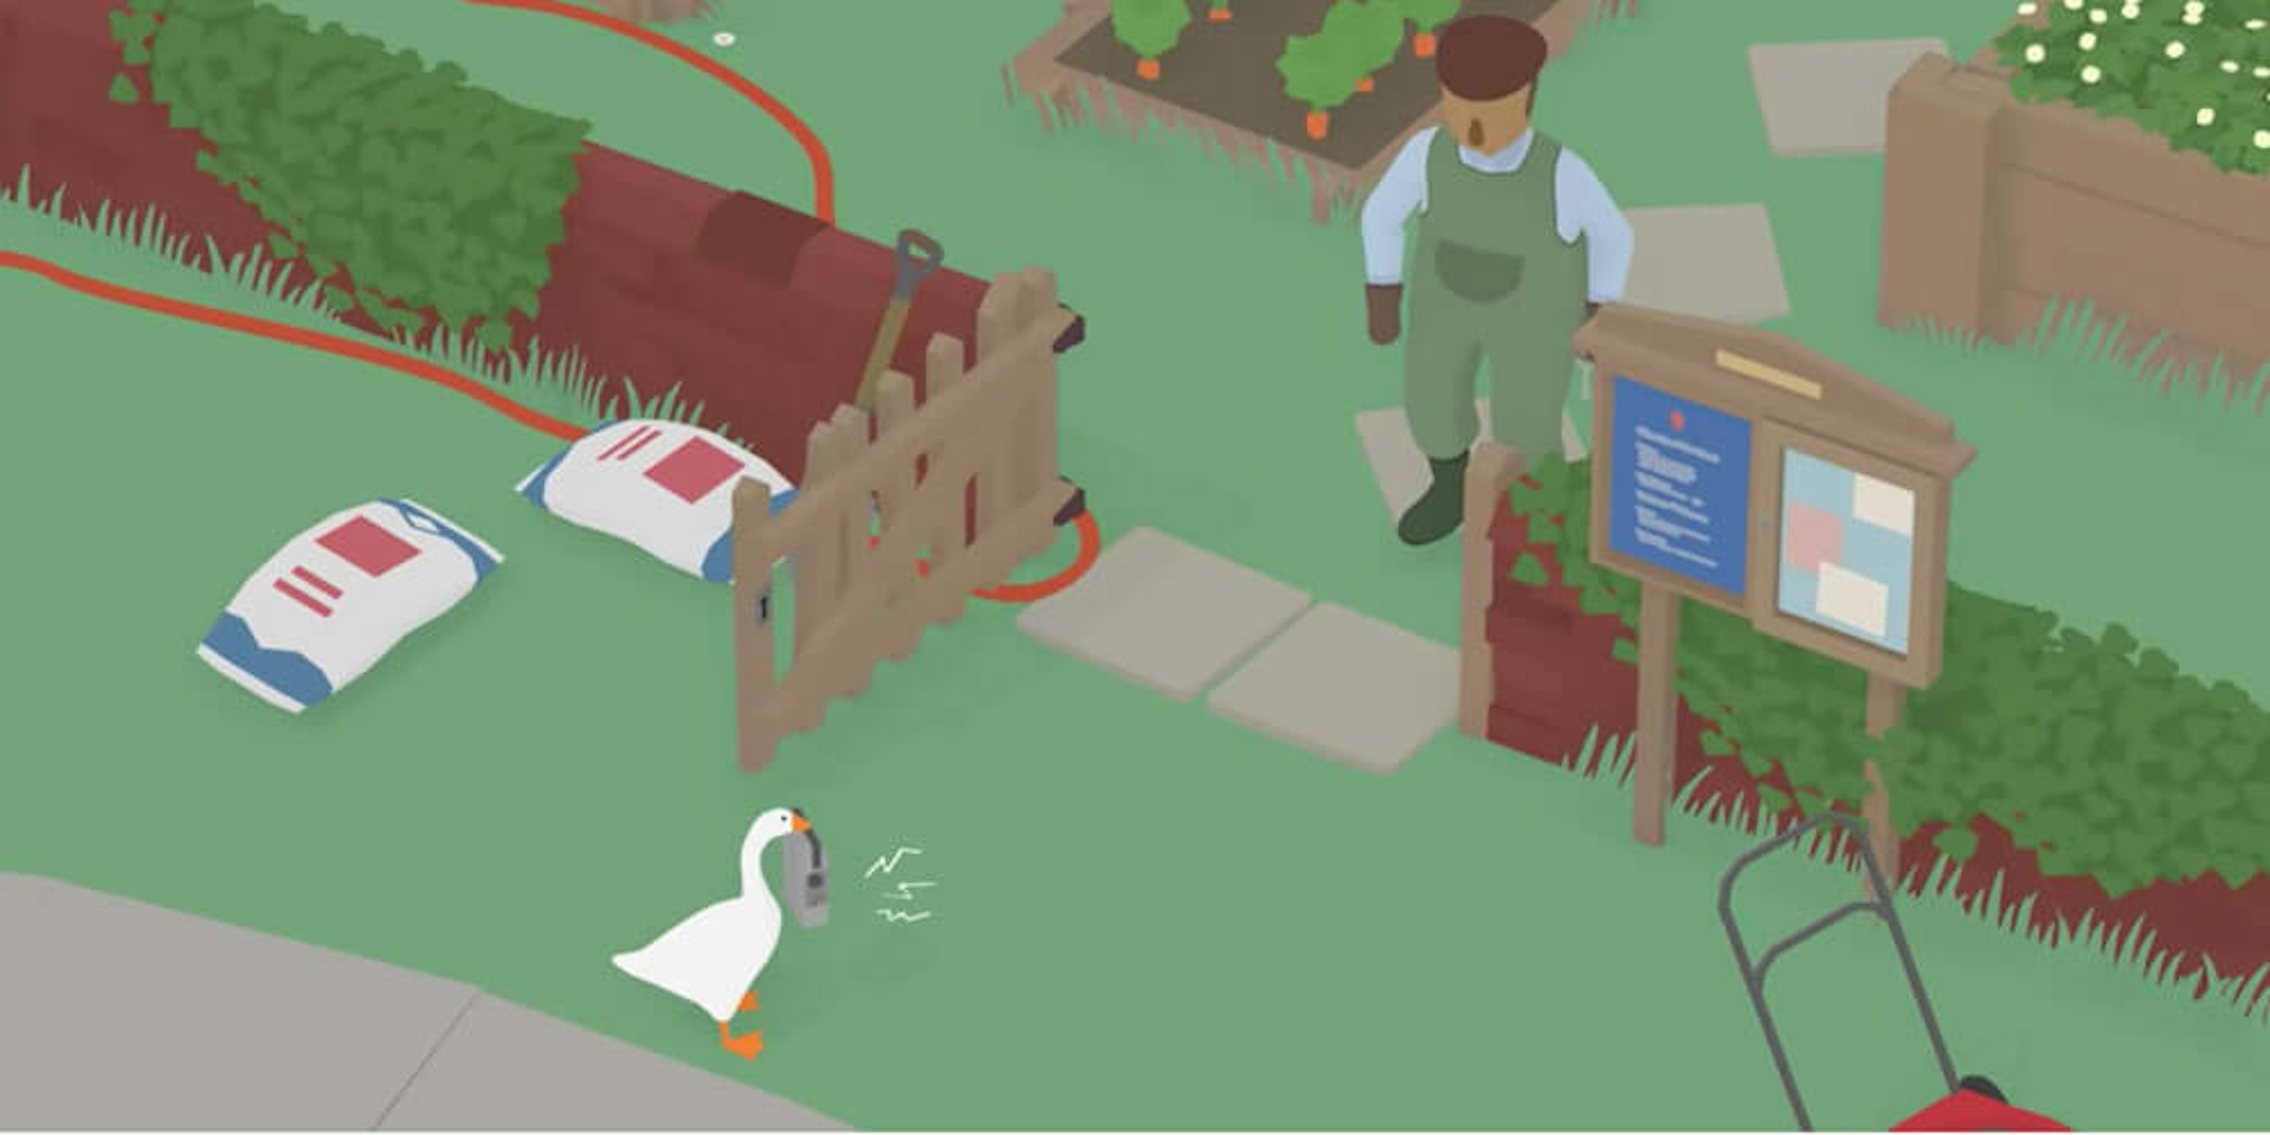 Untitled Goose Game security hole could have allowed hackers to